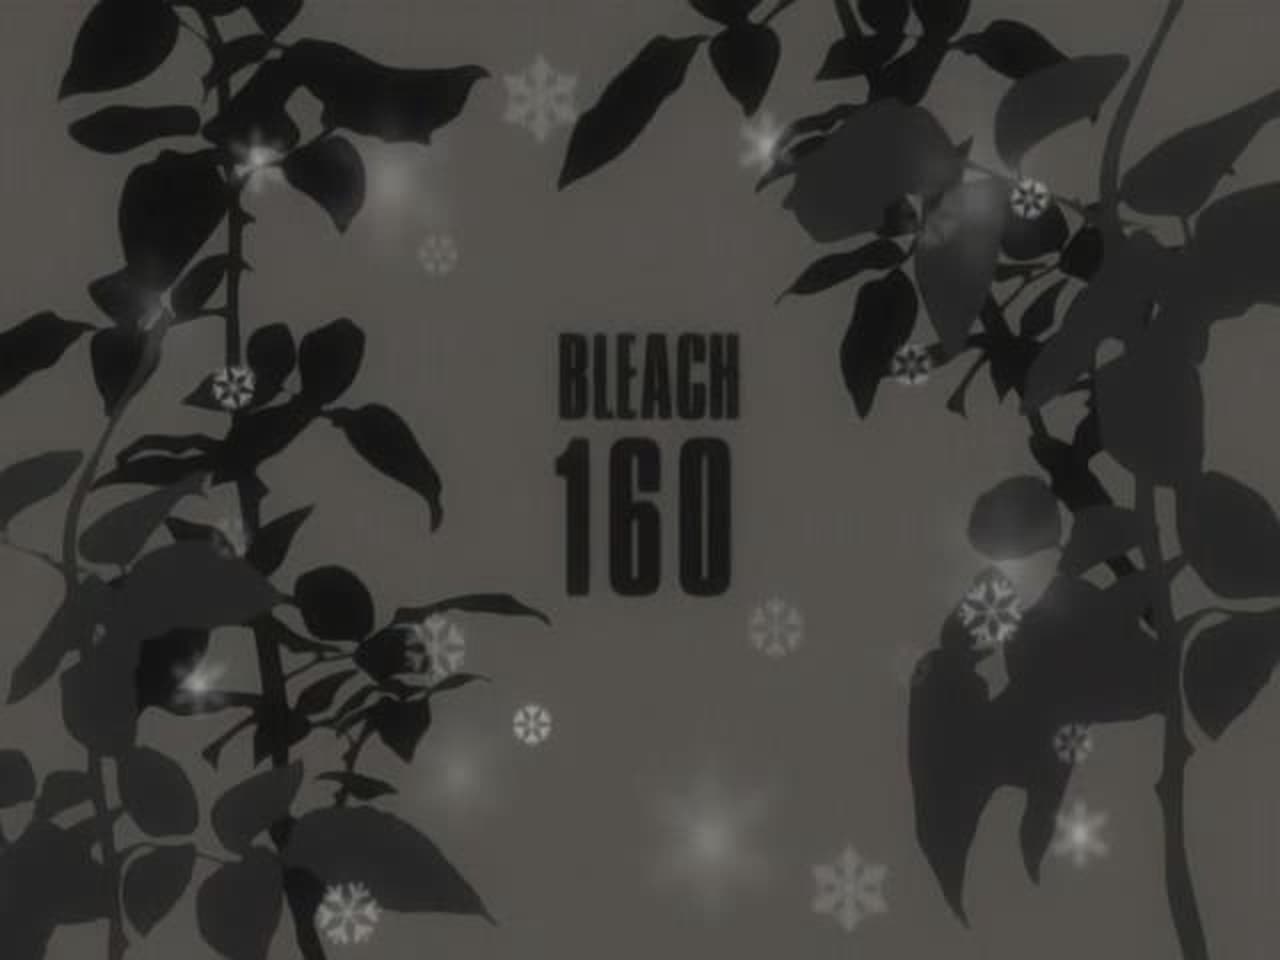 Bleach - Season 1 Episode 160 : Testament, Your Heart is Right Here...